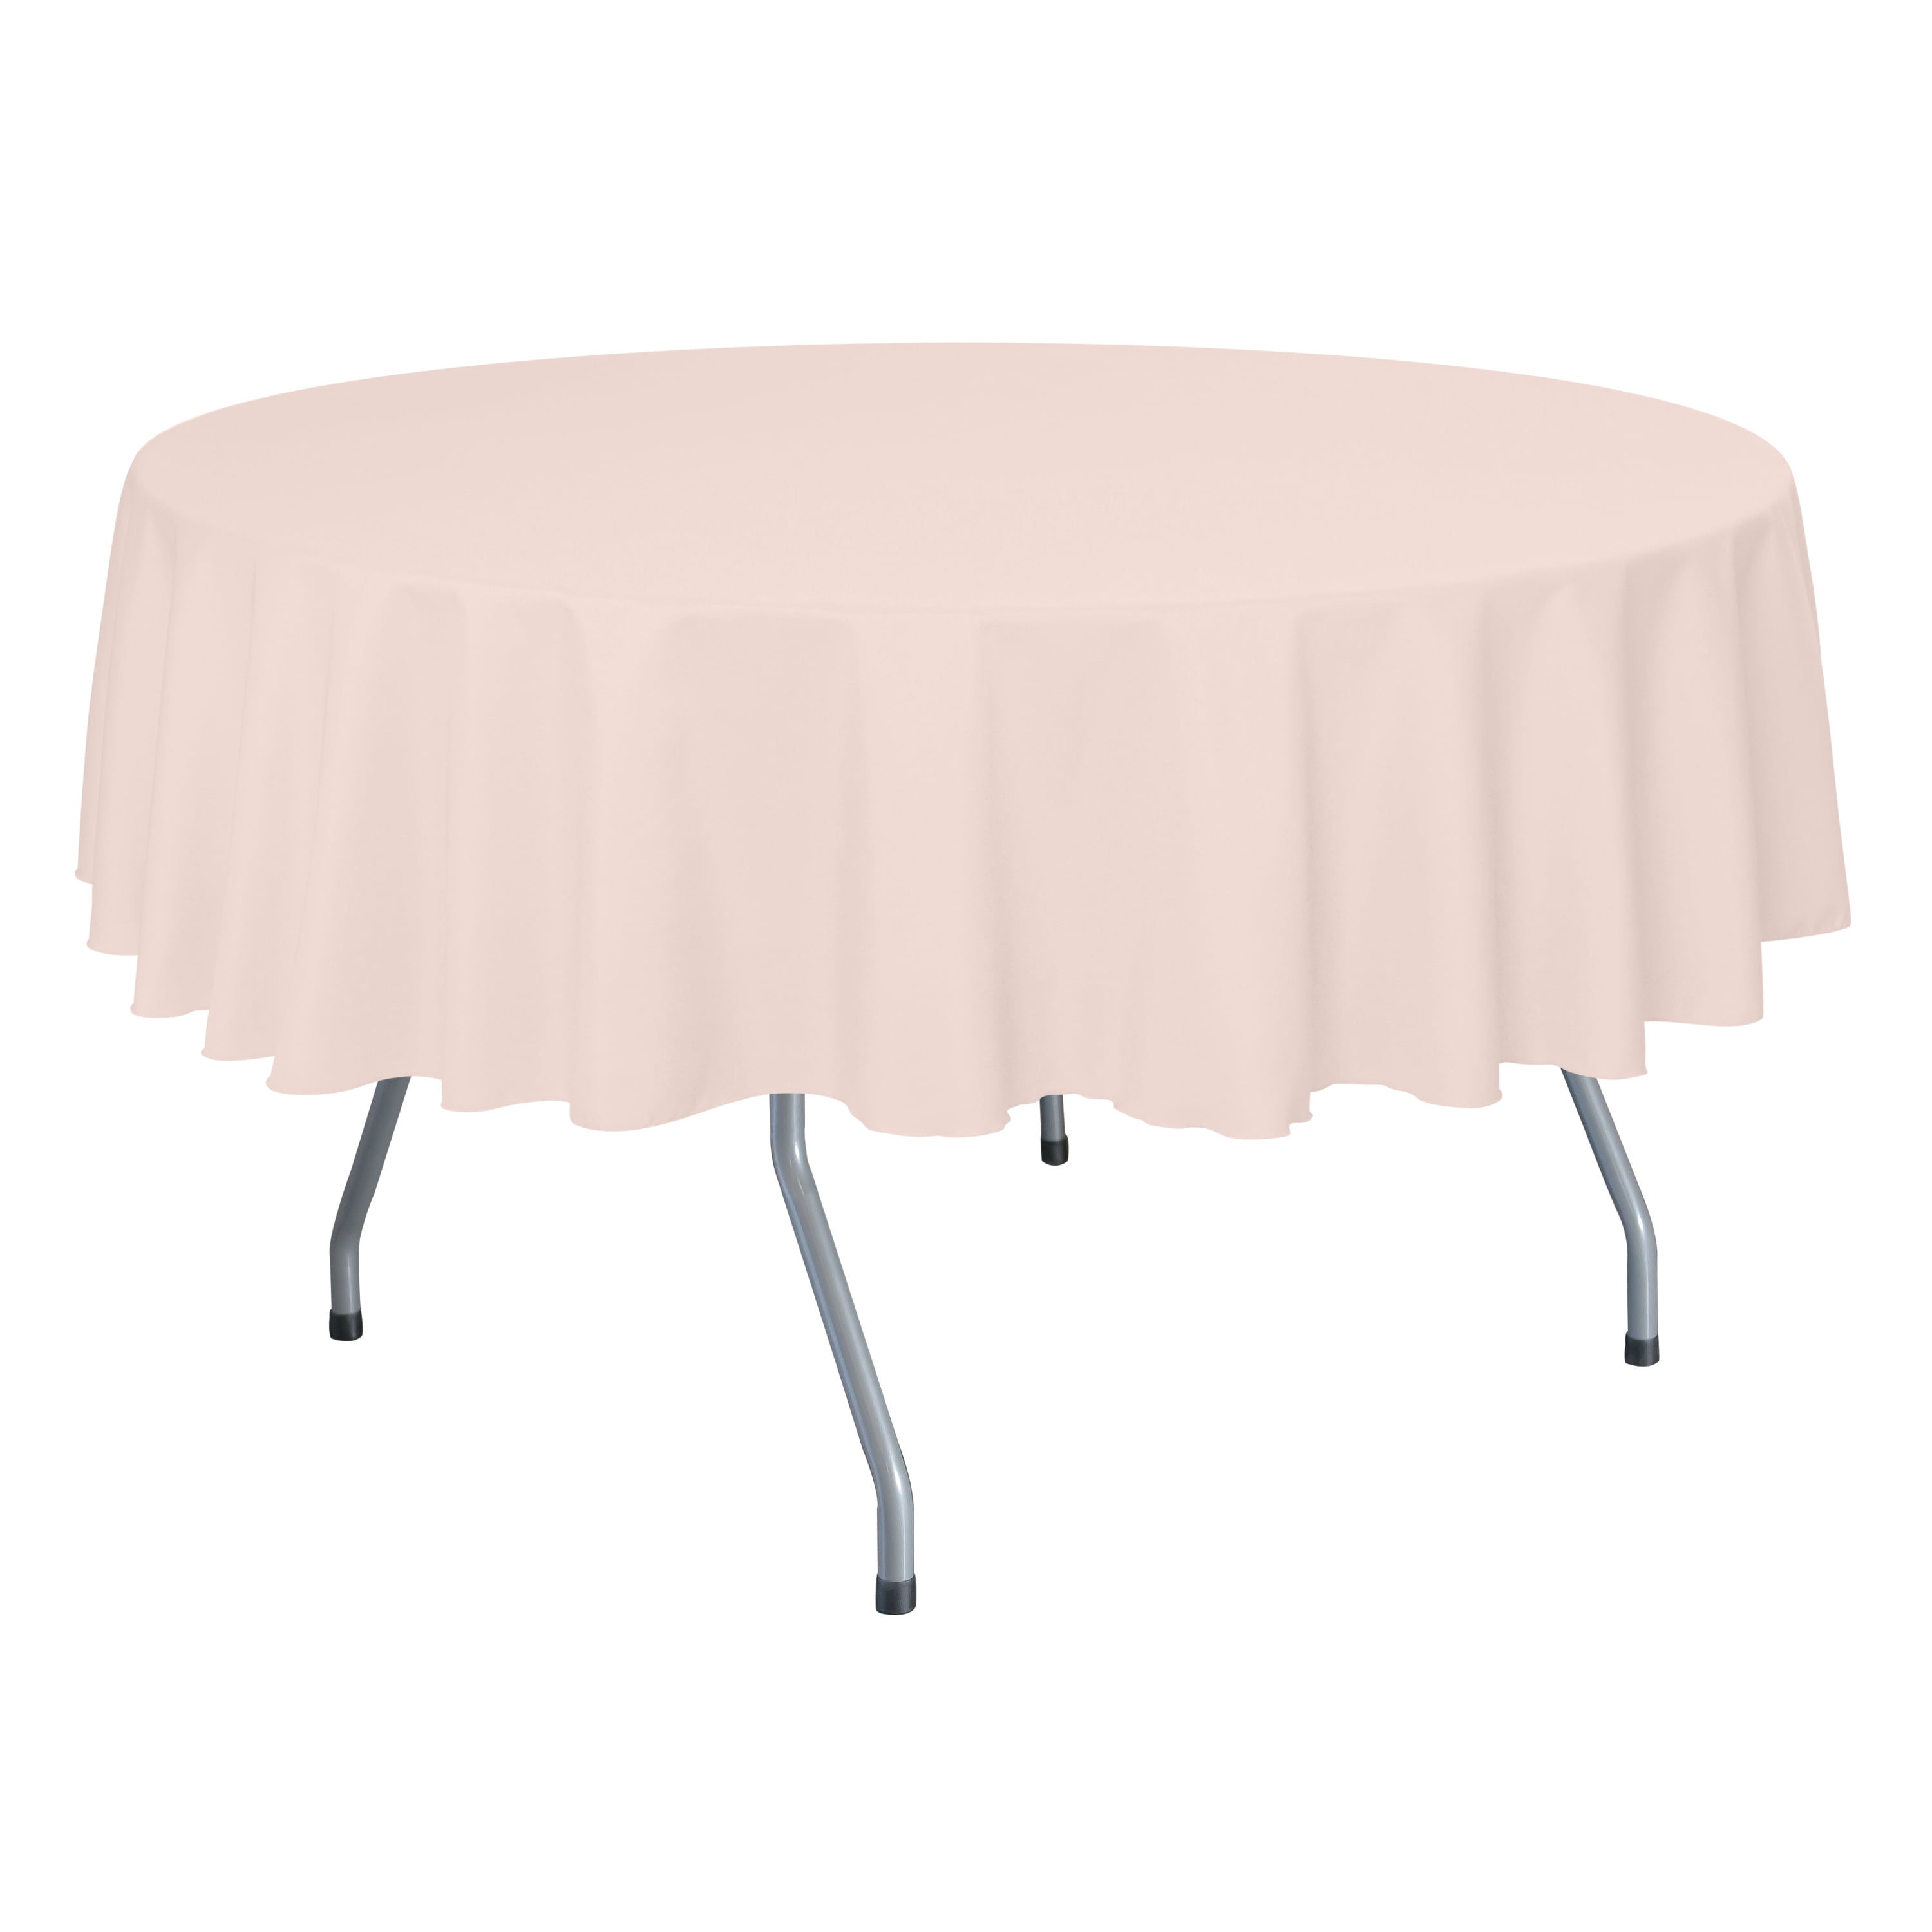 Round Polyester Linen Tablecloth, 72 Inch Round Tablecloth